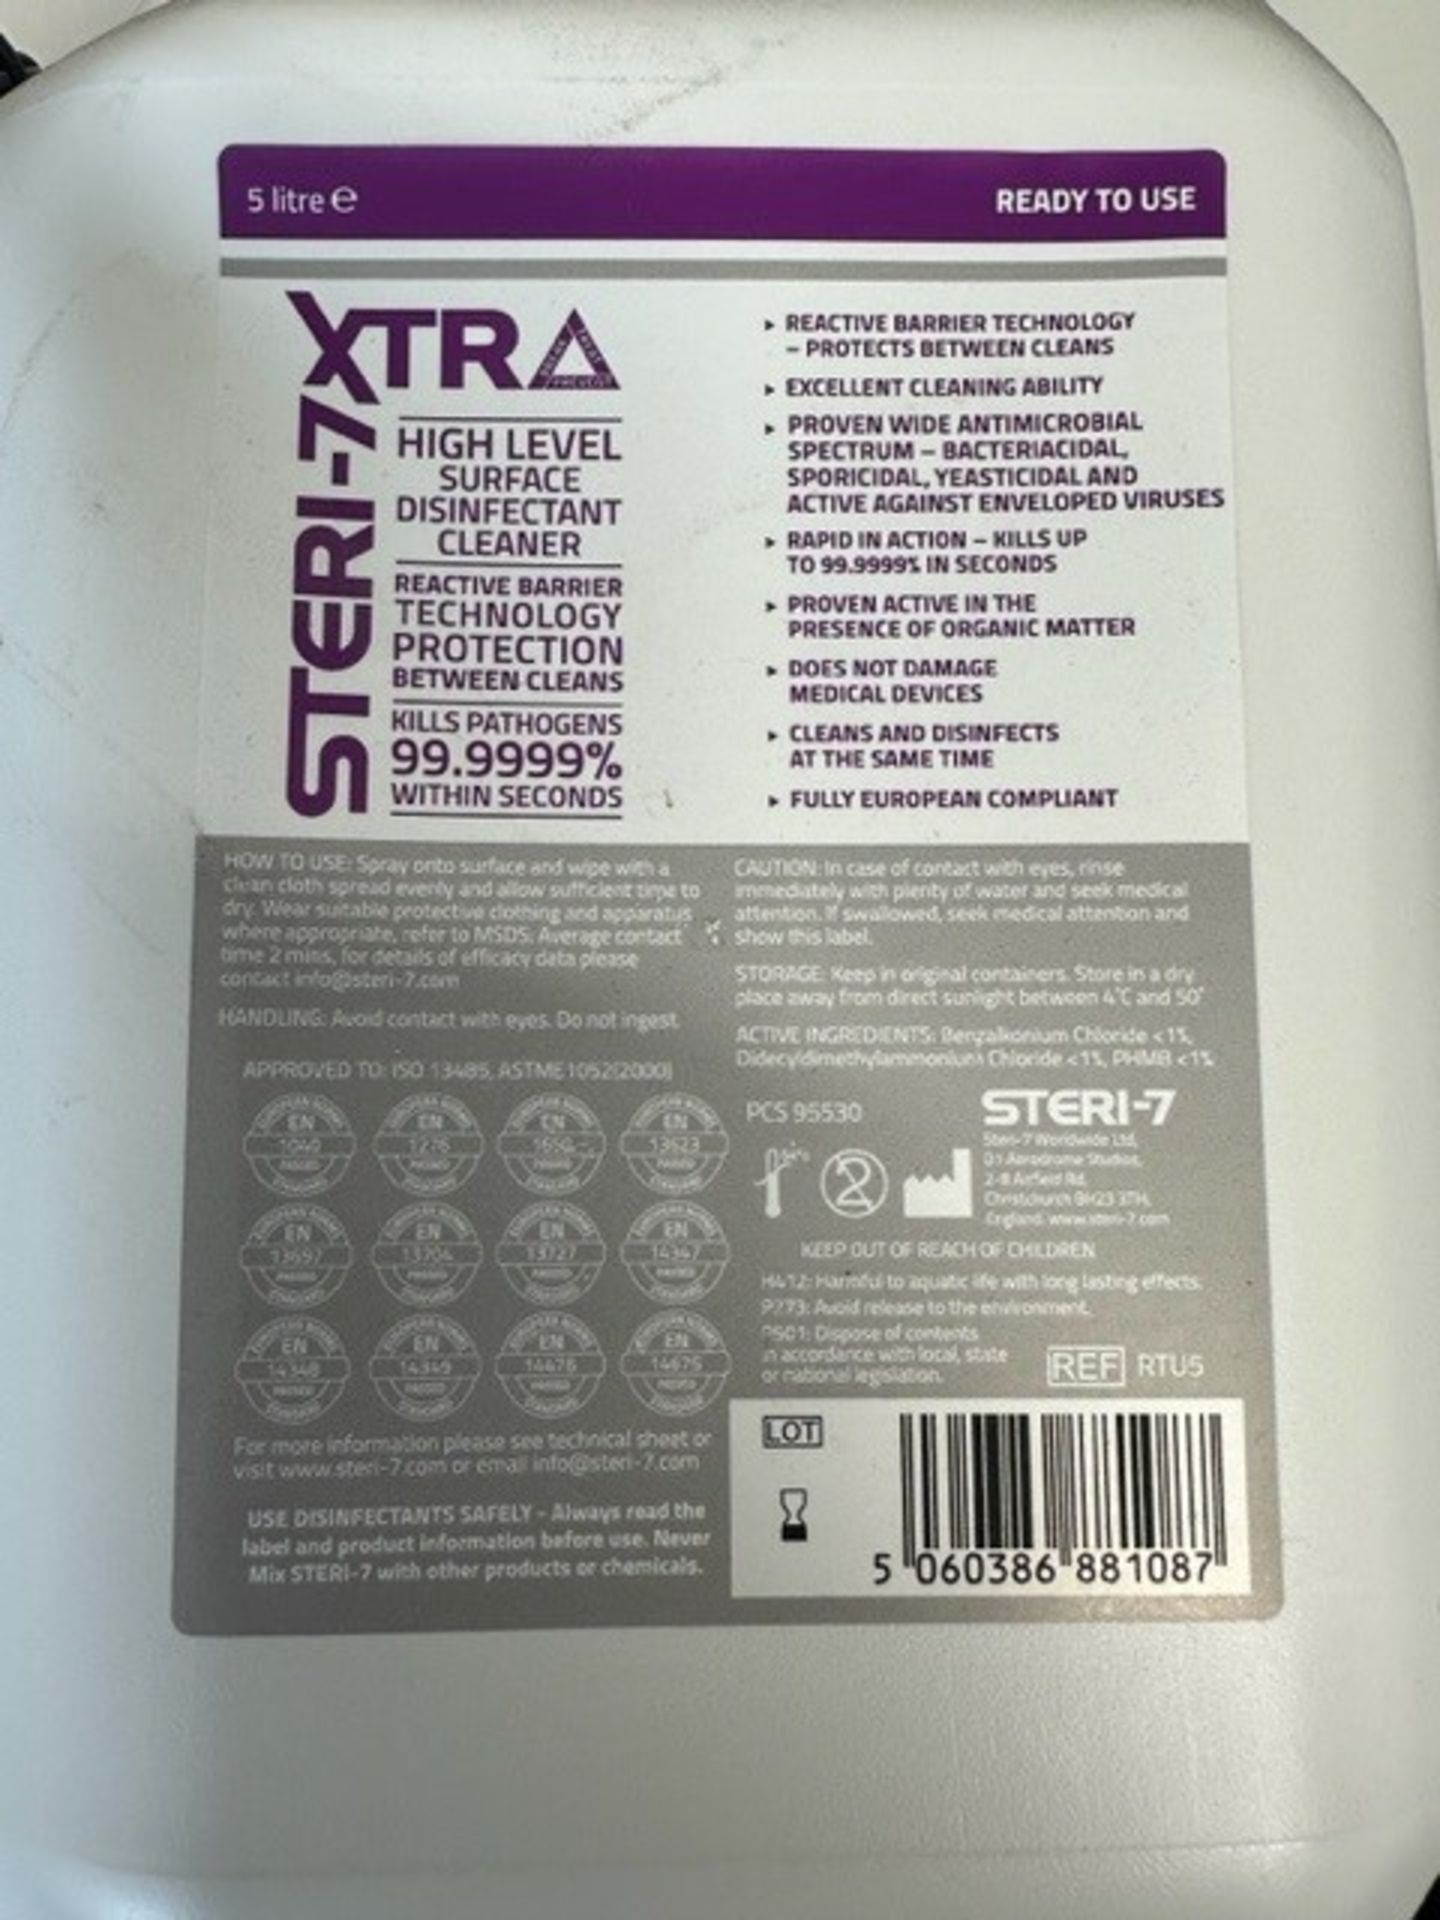 40 x Steri-7 5L Bottles of Xtra High Level Surface Disinfectant Cleaner - Ready to Use (10 outer - Image 2 of 12